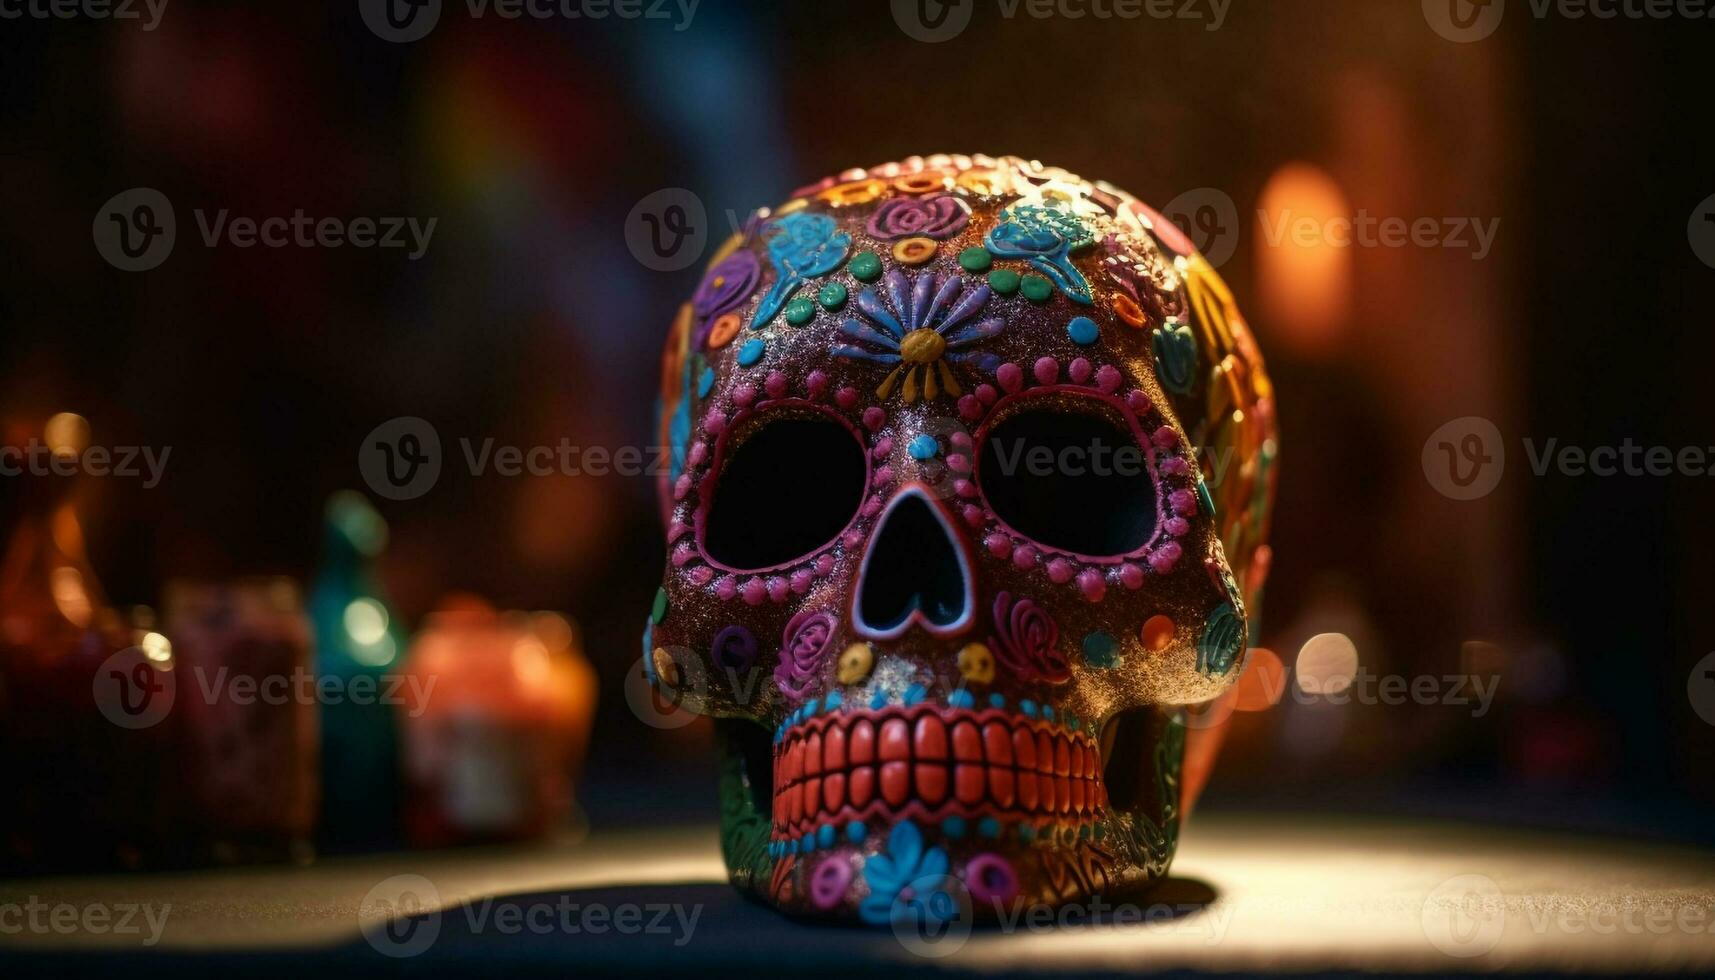 Spooky Halloween celebration with ornate decorations and illuminated skulls generated by AI photo